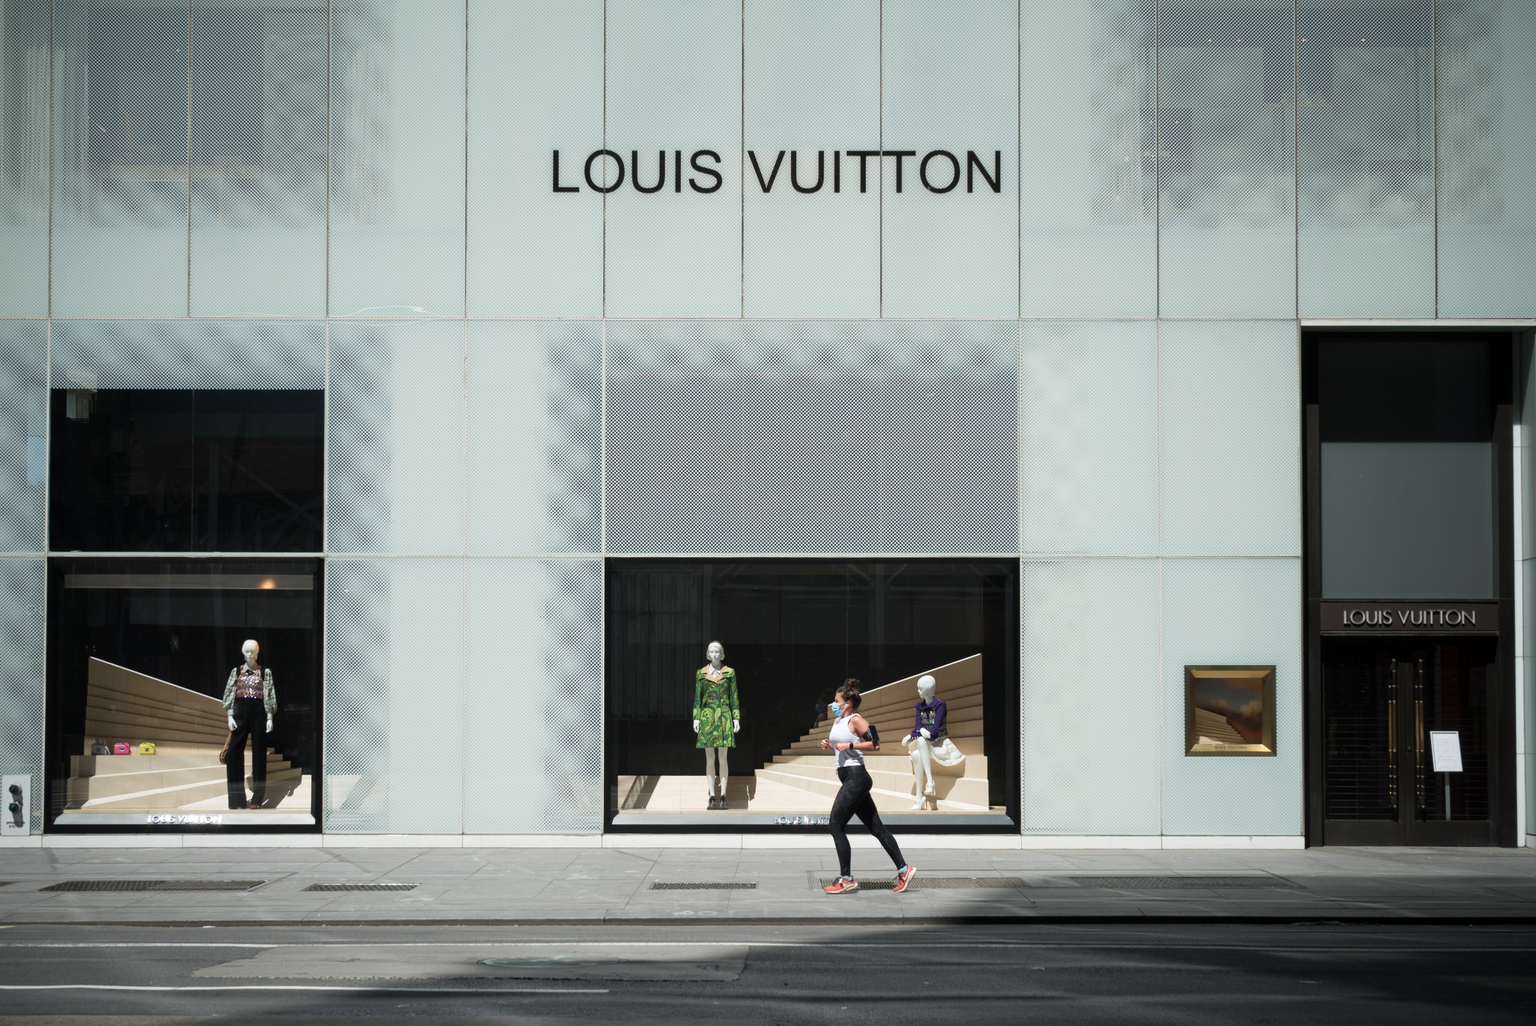 LVMH - Moët Hennessy Louis Vuitton SA: Stock Market News and